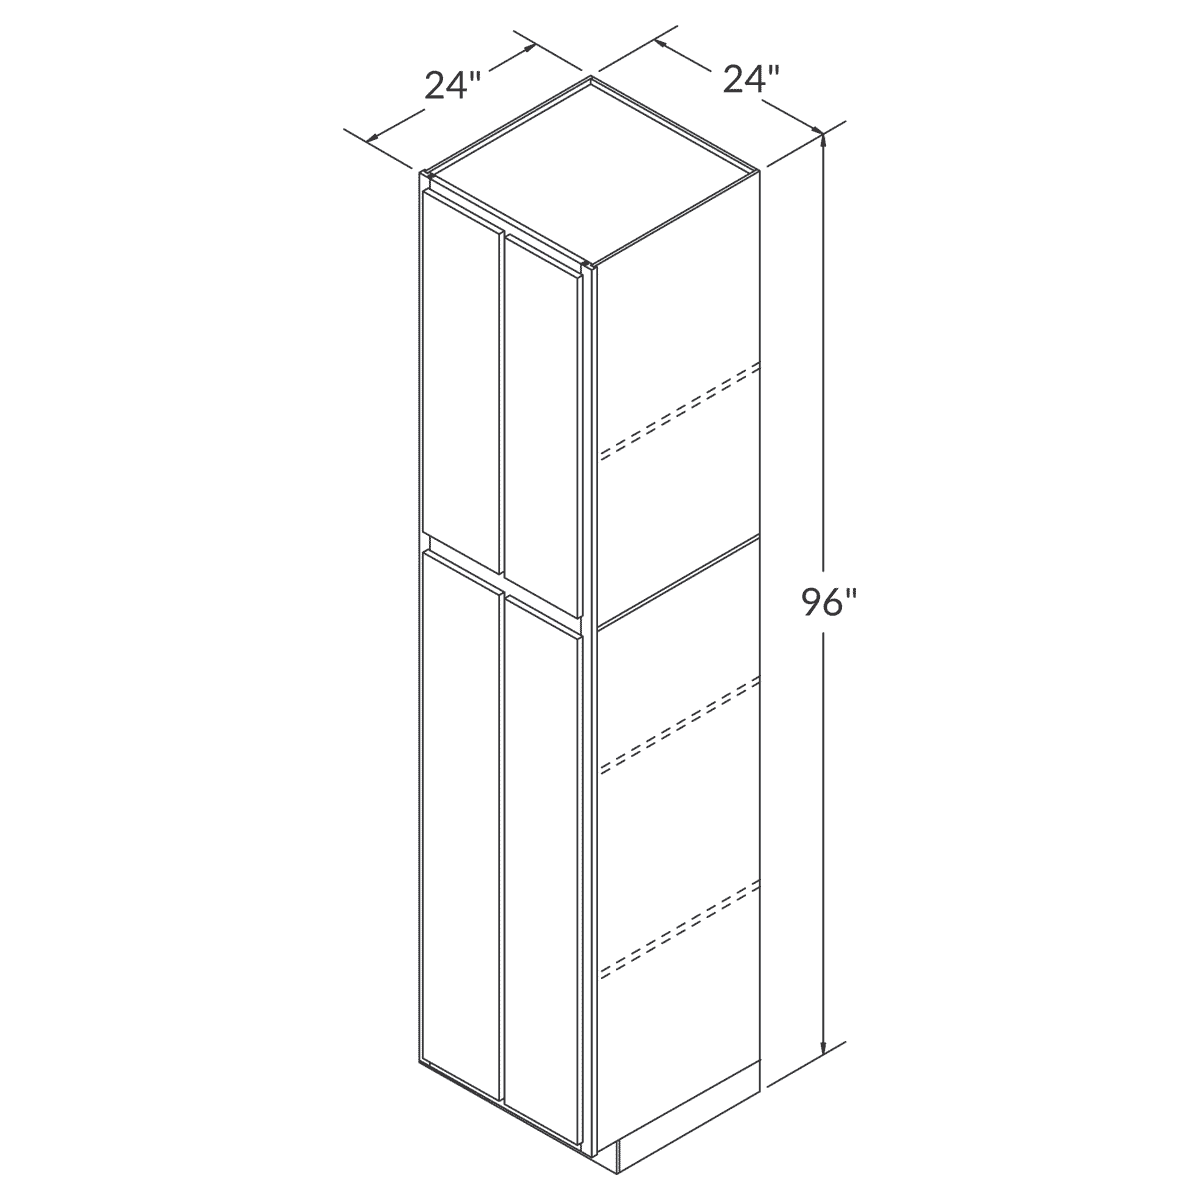 Cubitac Basic Oxford Latte Tall Pantry 24"W x 96"H Assembled Cabinet Wireframe